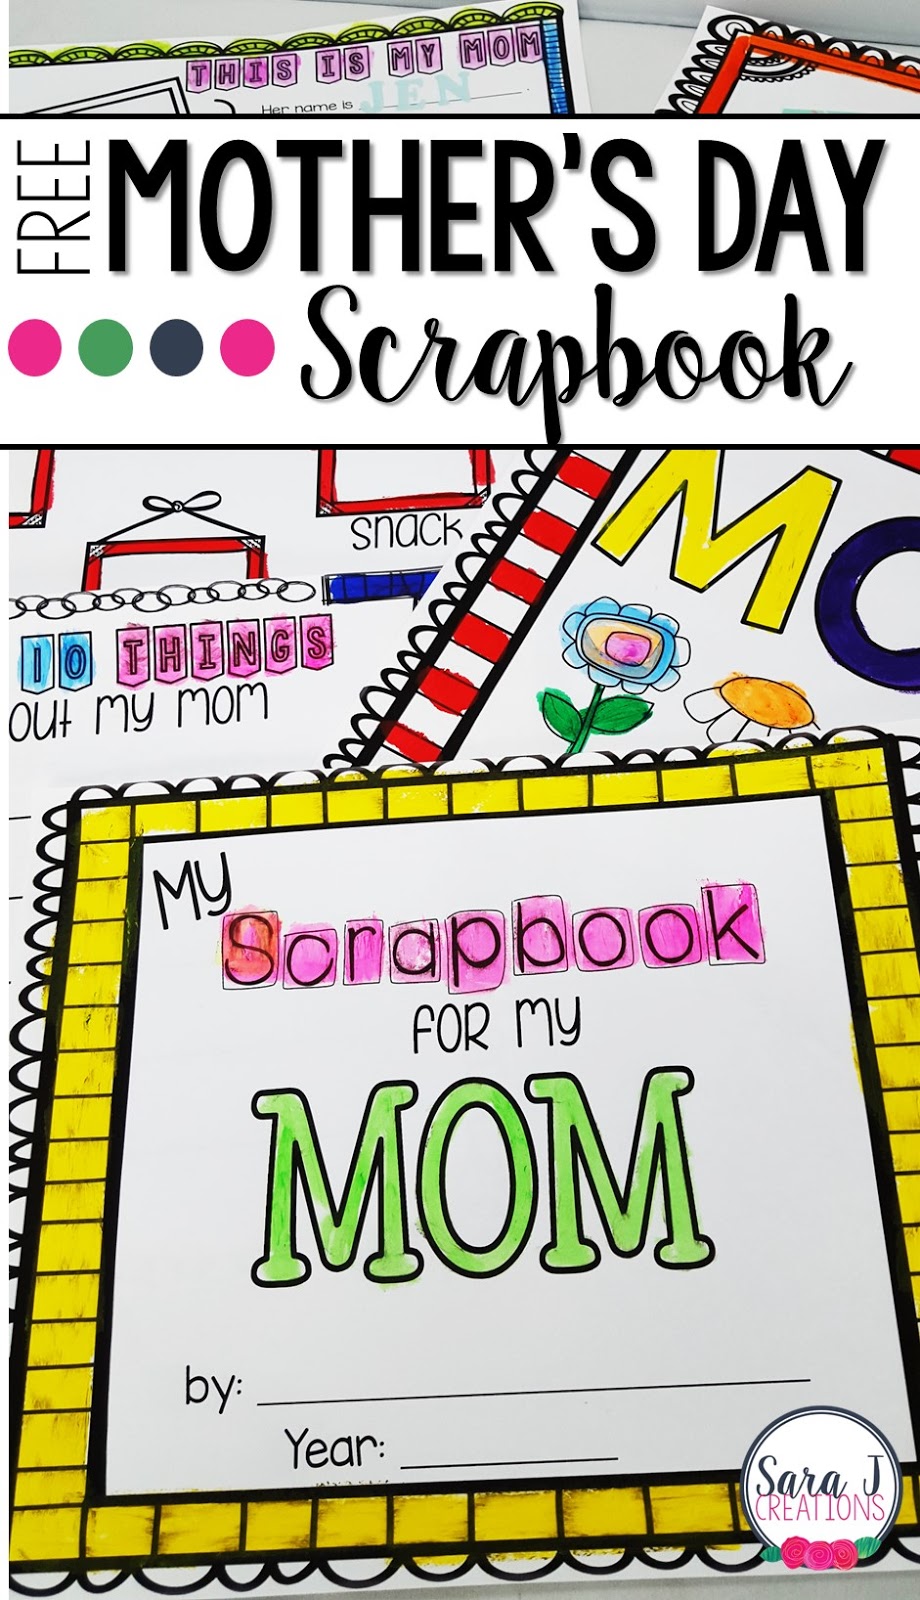 Free mother's day scrapbook for young students to create for their mothers. Includes prompts and places to add pictures.